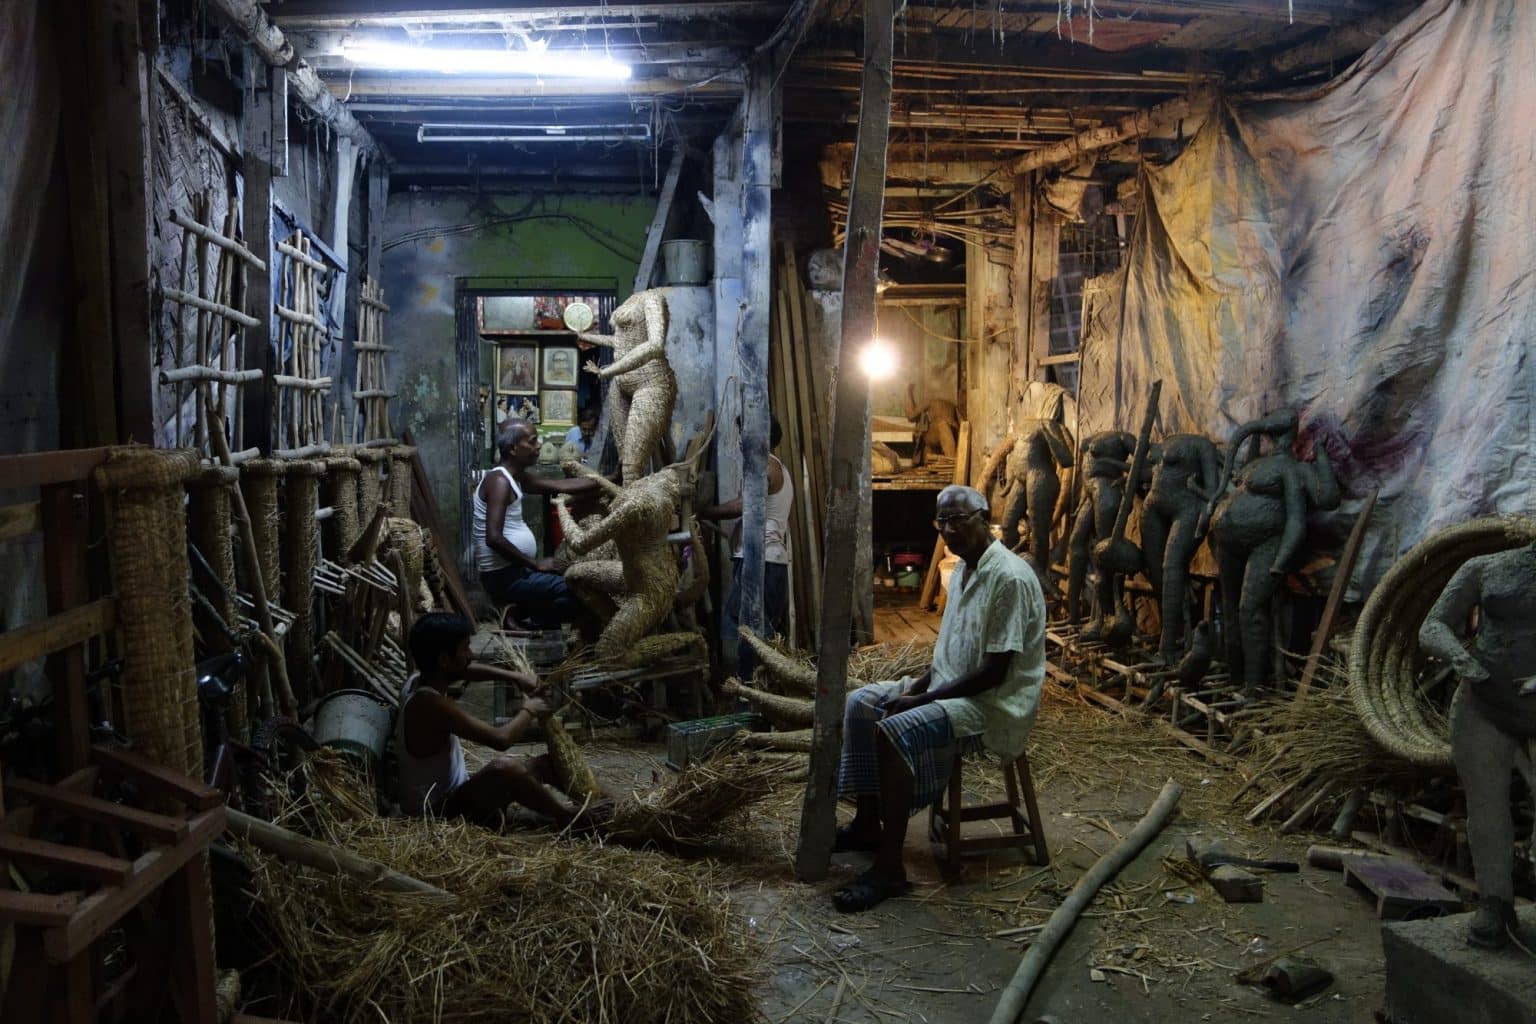 Kumartuli artisans, in Kolkata, building the armatures for clay idols for Durga Puja; International Changemakers British Council / Coventry City of Culture Research trip, 2020